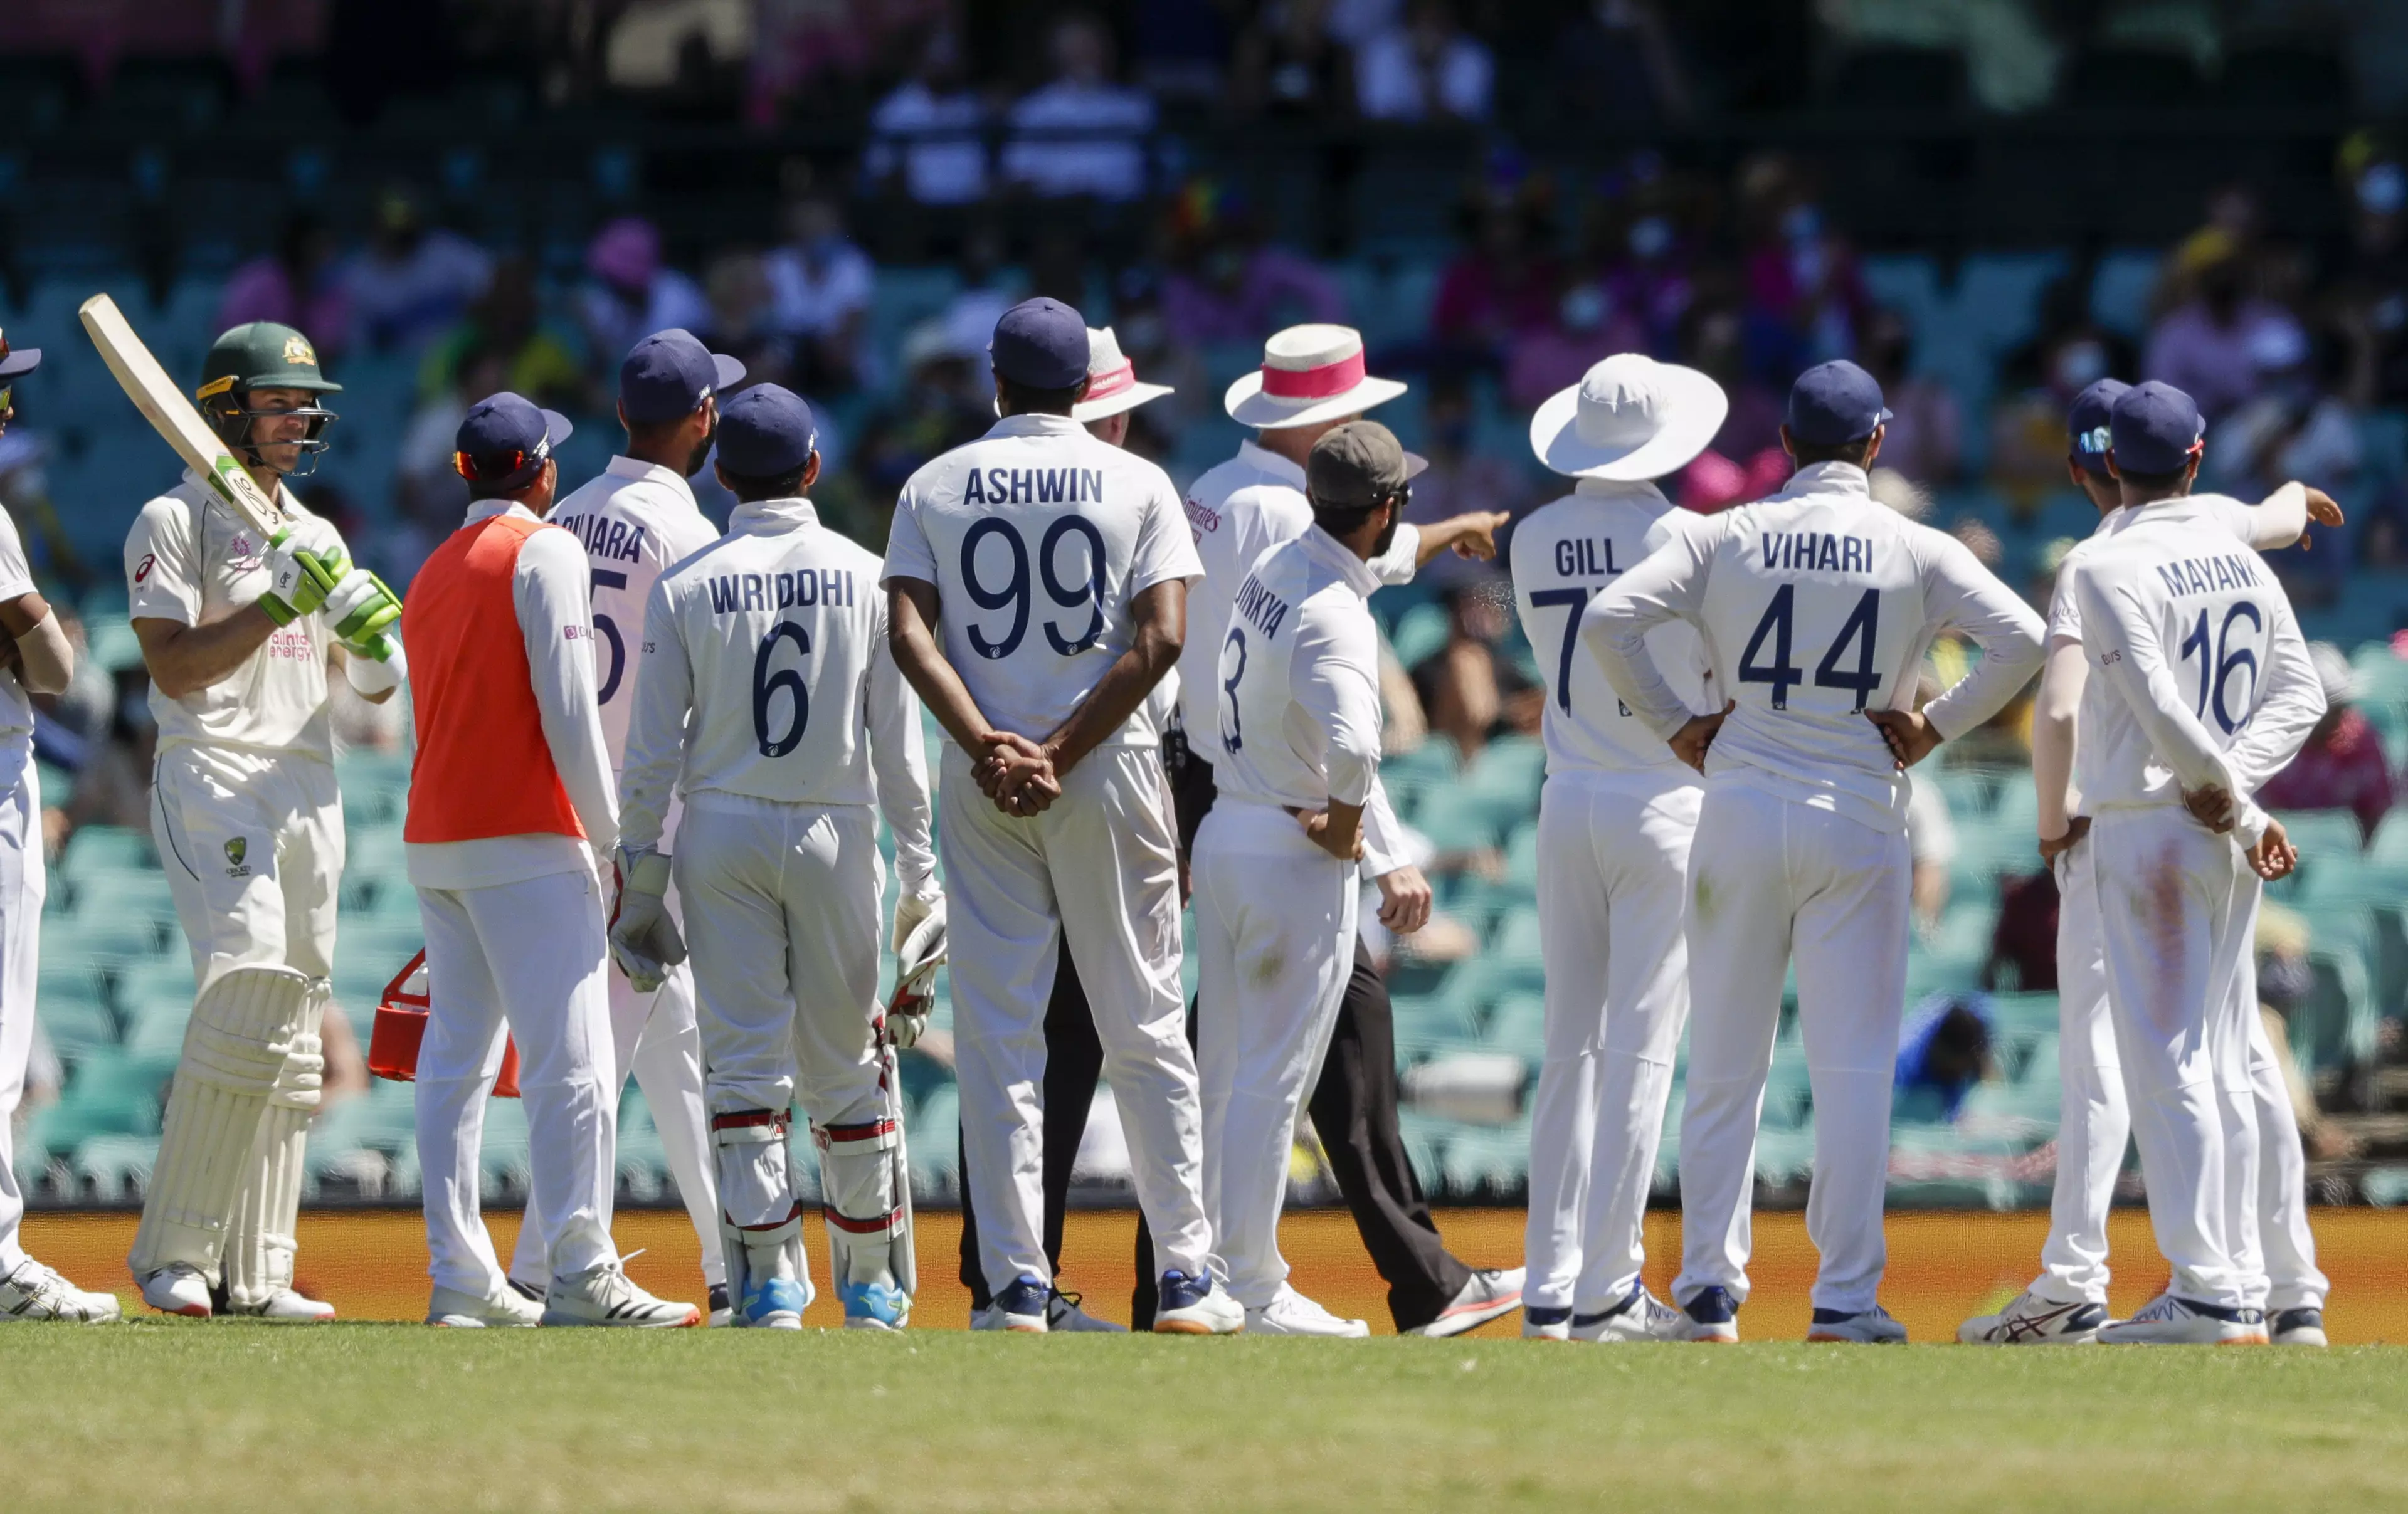 Play was halted when India's players notified the umpires of the incident.